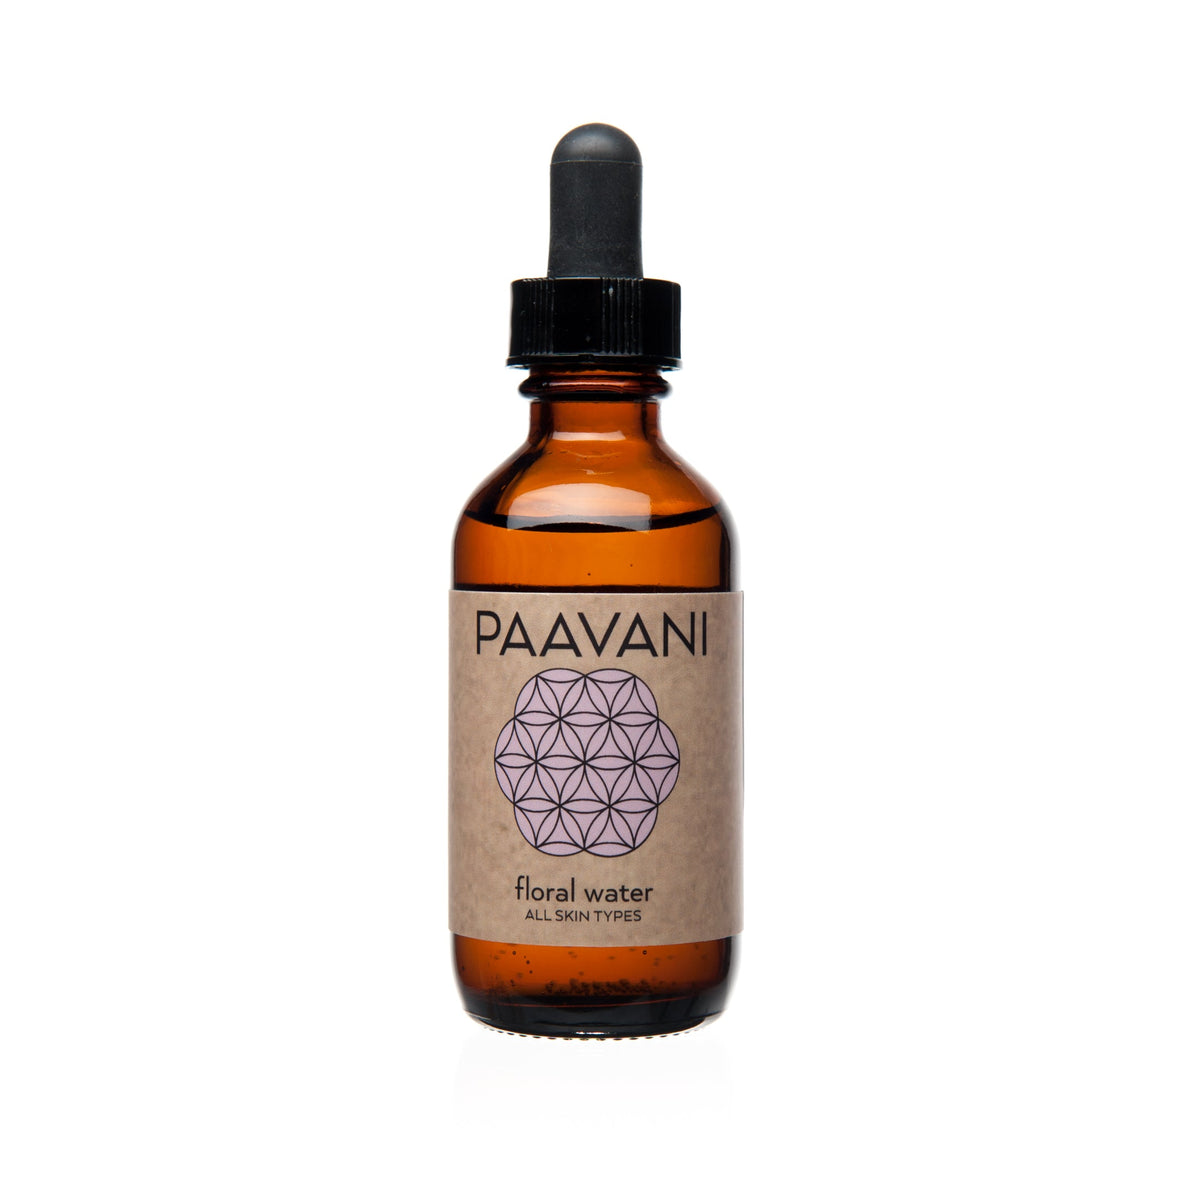 * Paavani Ayurveda - Floral Water, Floral Notes of Rose and Lavender, All Skin Types, Ayurvedic Skincare-0